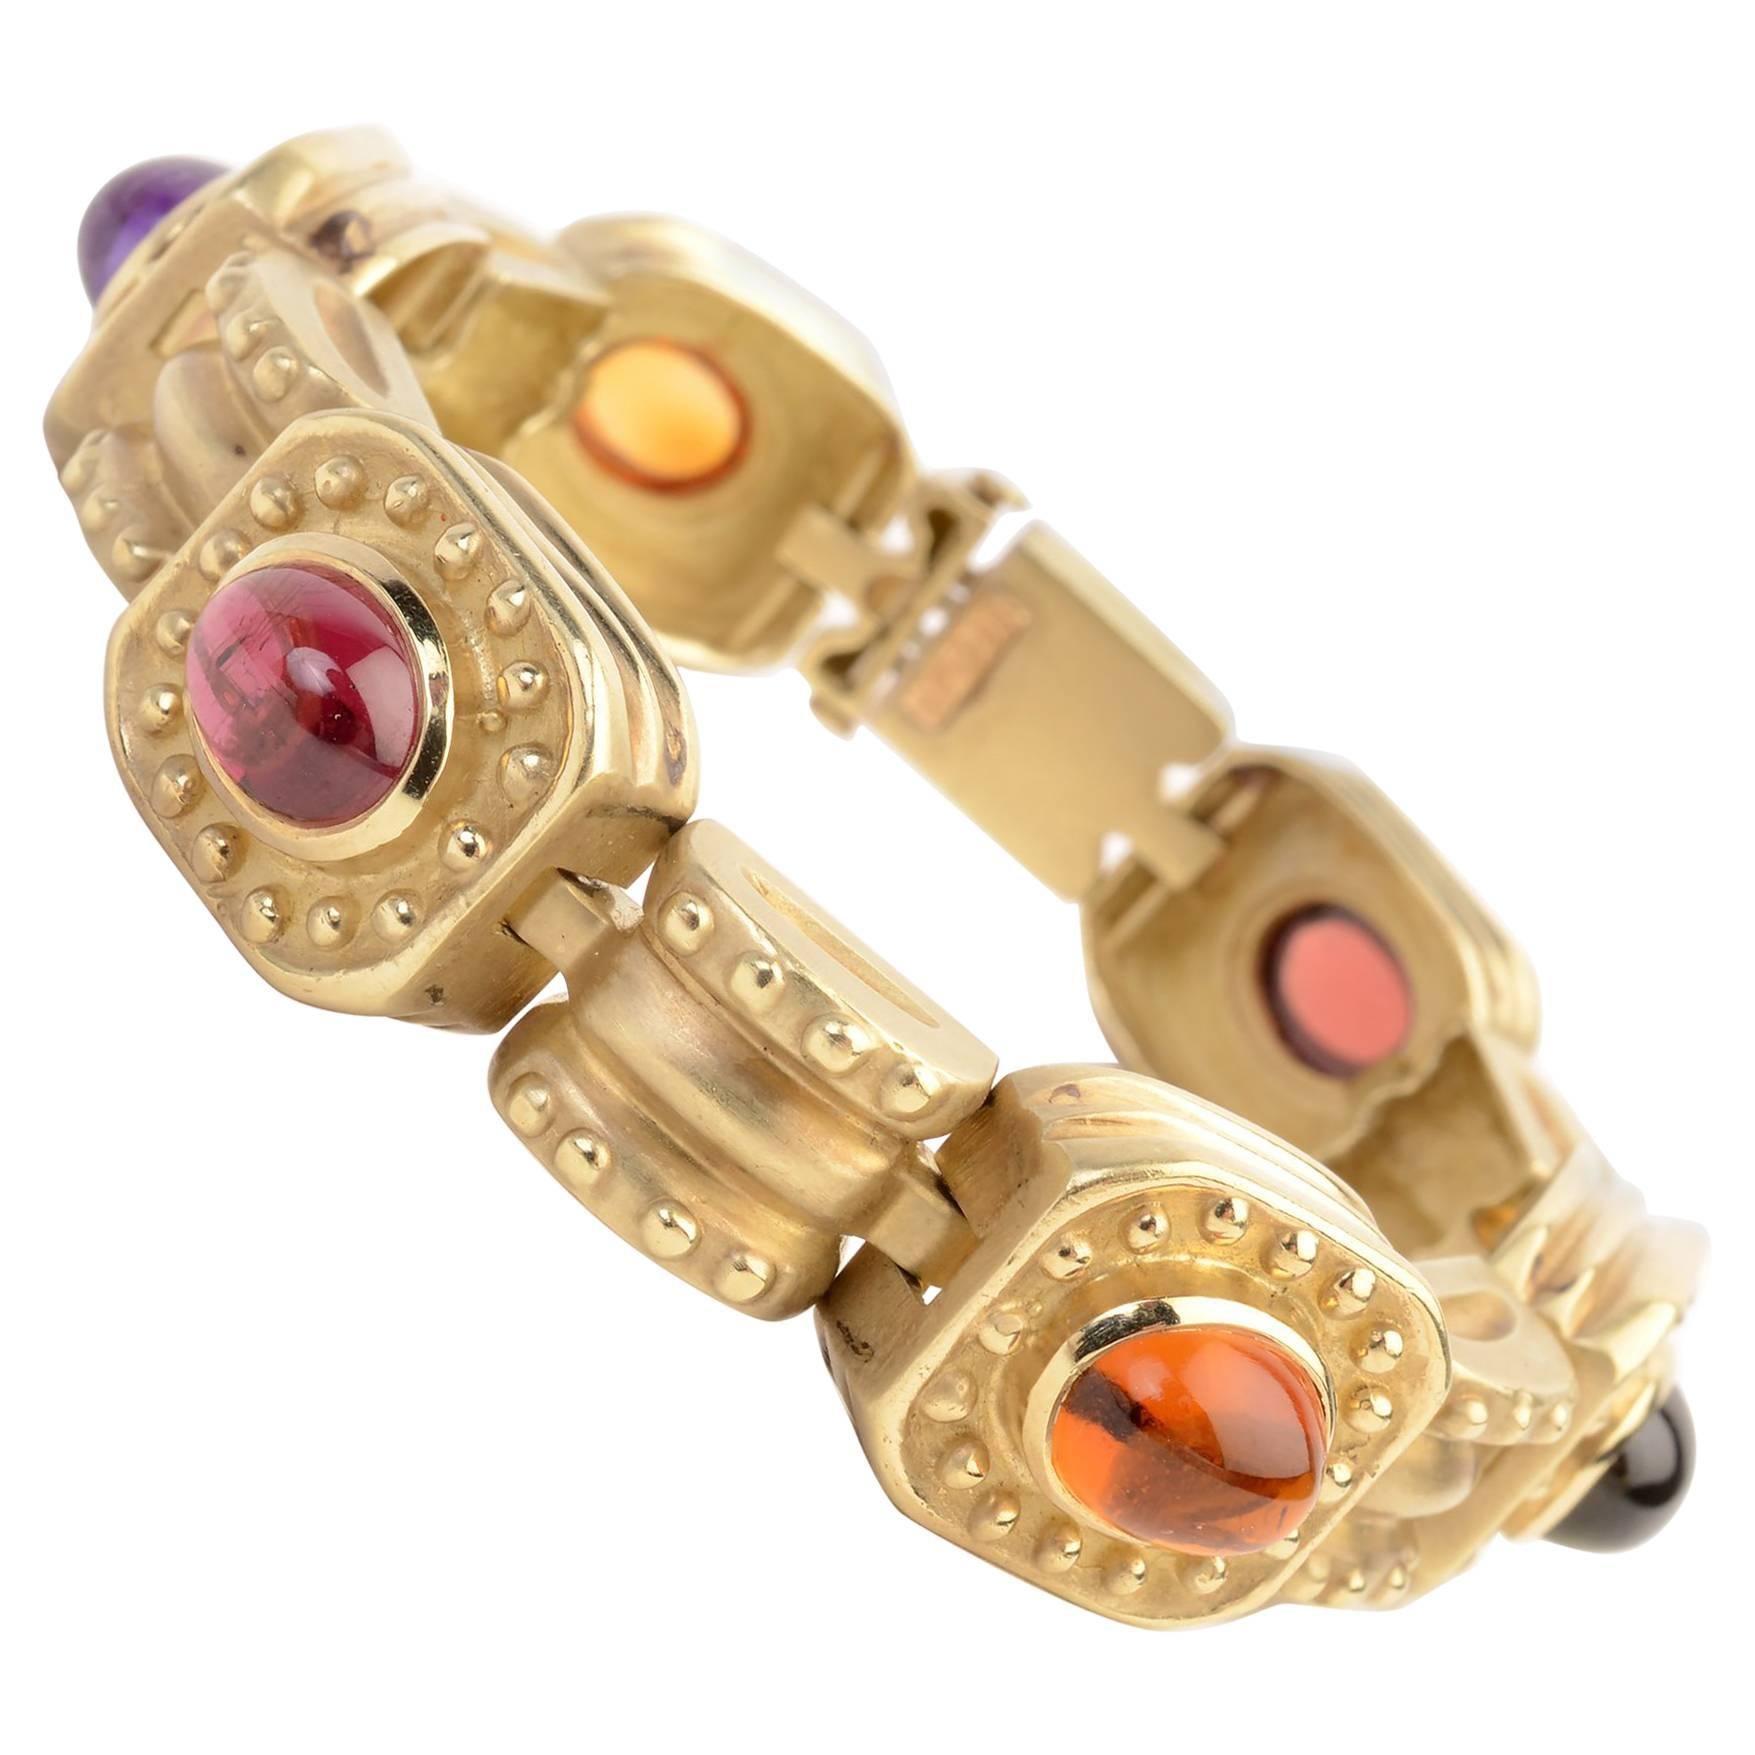 Eighteen karat gold bracelet by SeidenGang with 6 plaques, each with a cabochon stone. They are amethyst; citrine; rubelite and tourmaline.  Arched links between the stones continue the raised circles pattern of the gold. The bracelet is 7 inches in